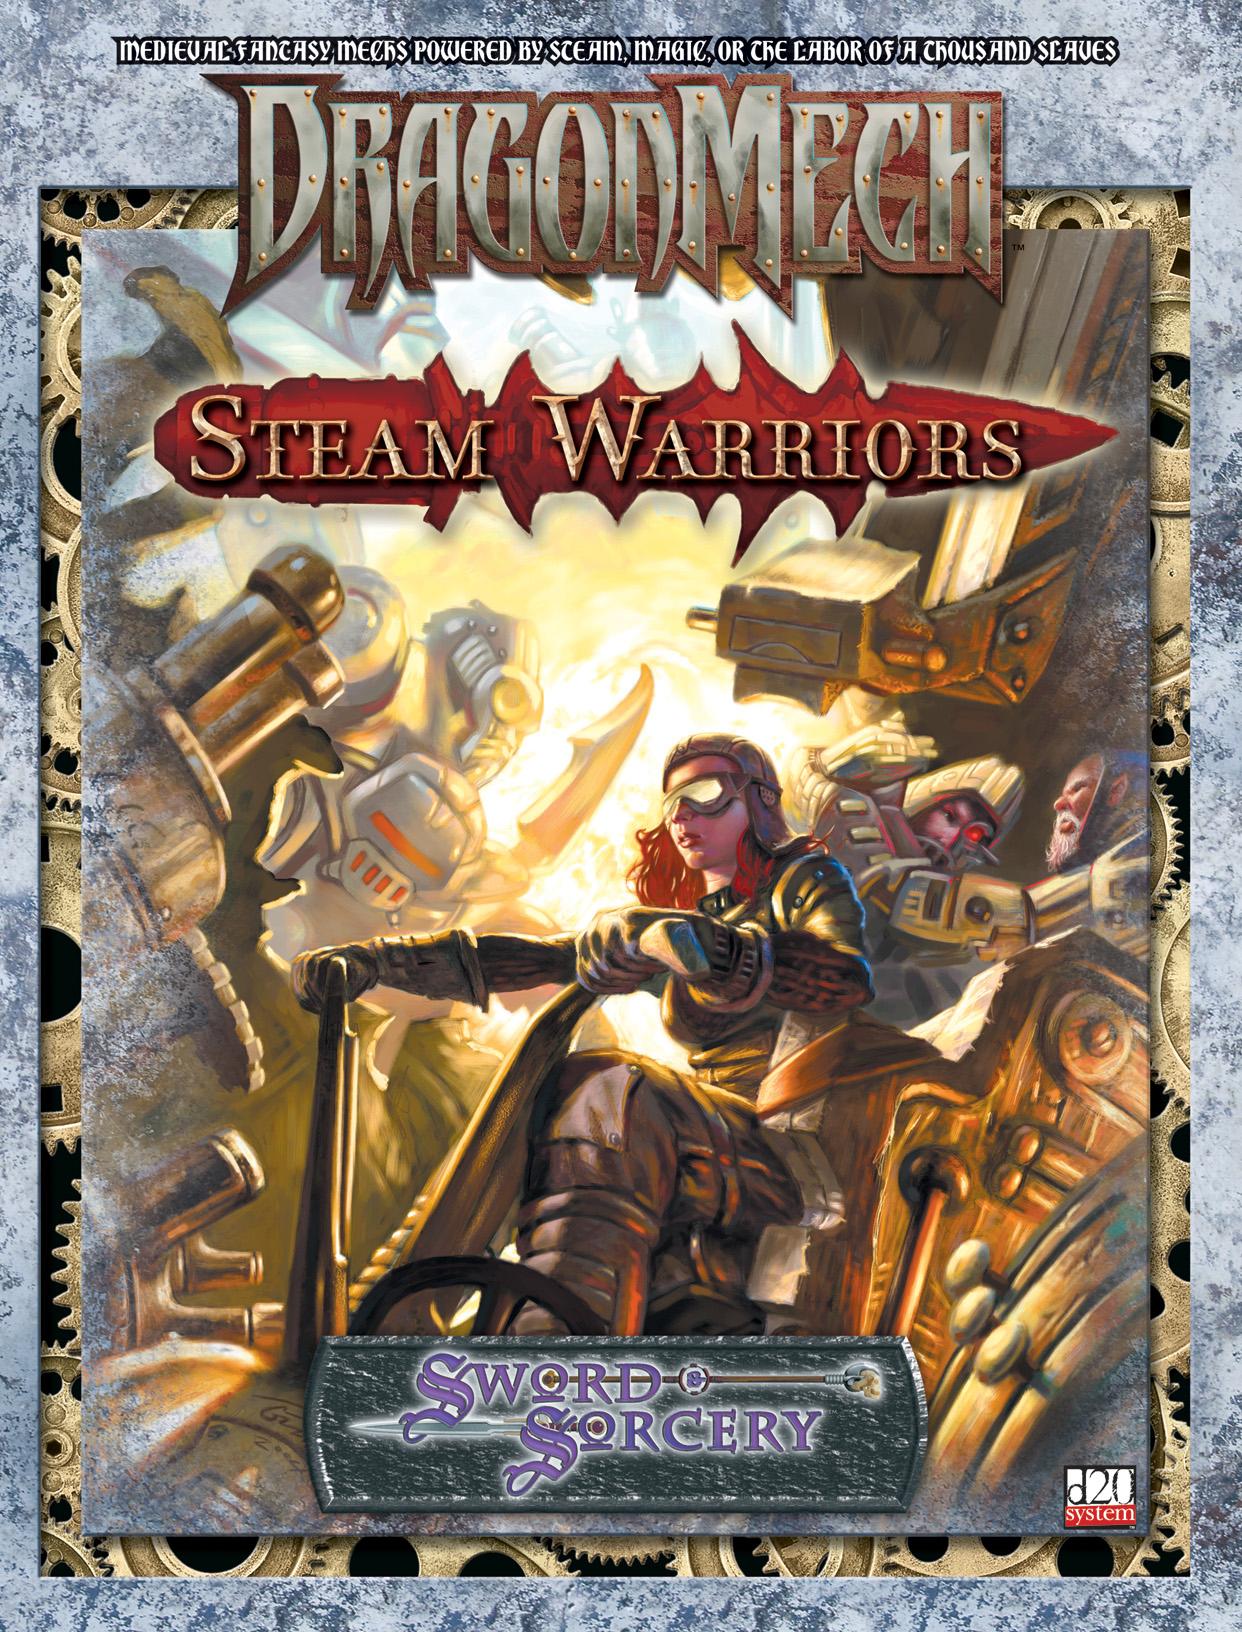 The Book of Warriors on Steam